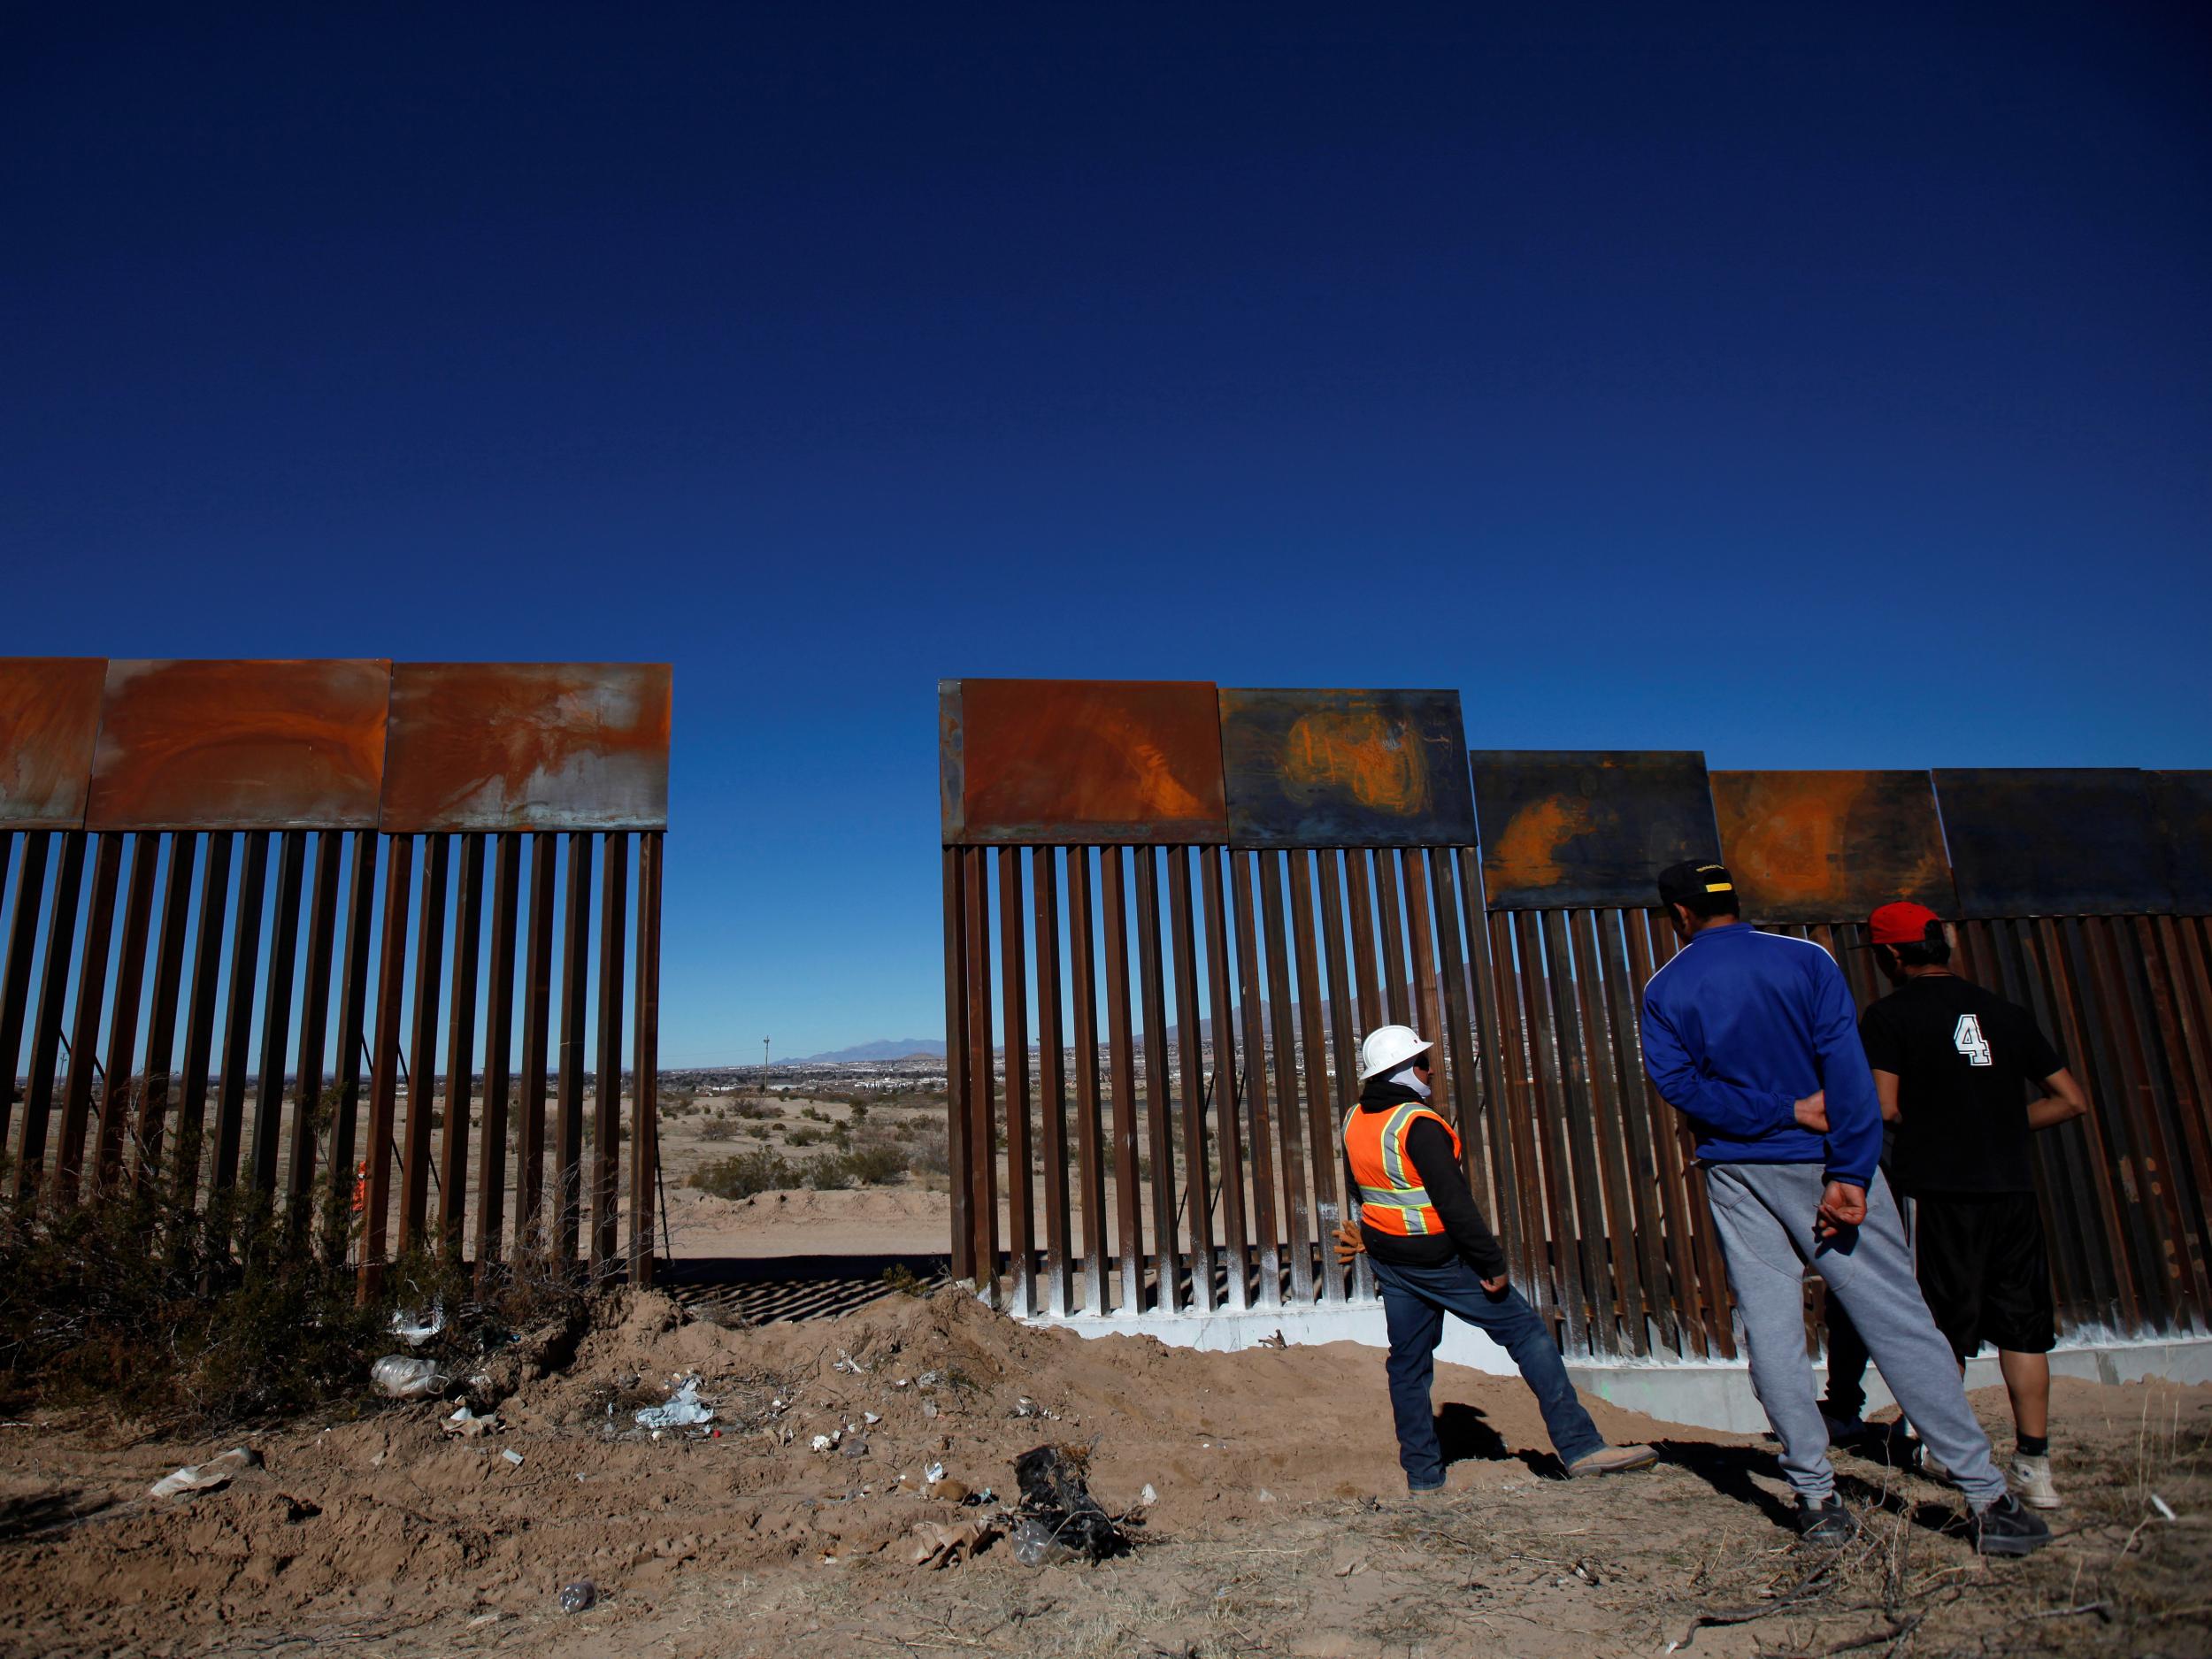 A worker chats with residents at a newly built section of the US-Mexico border fence